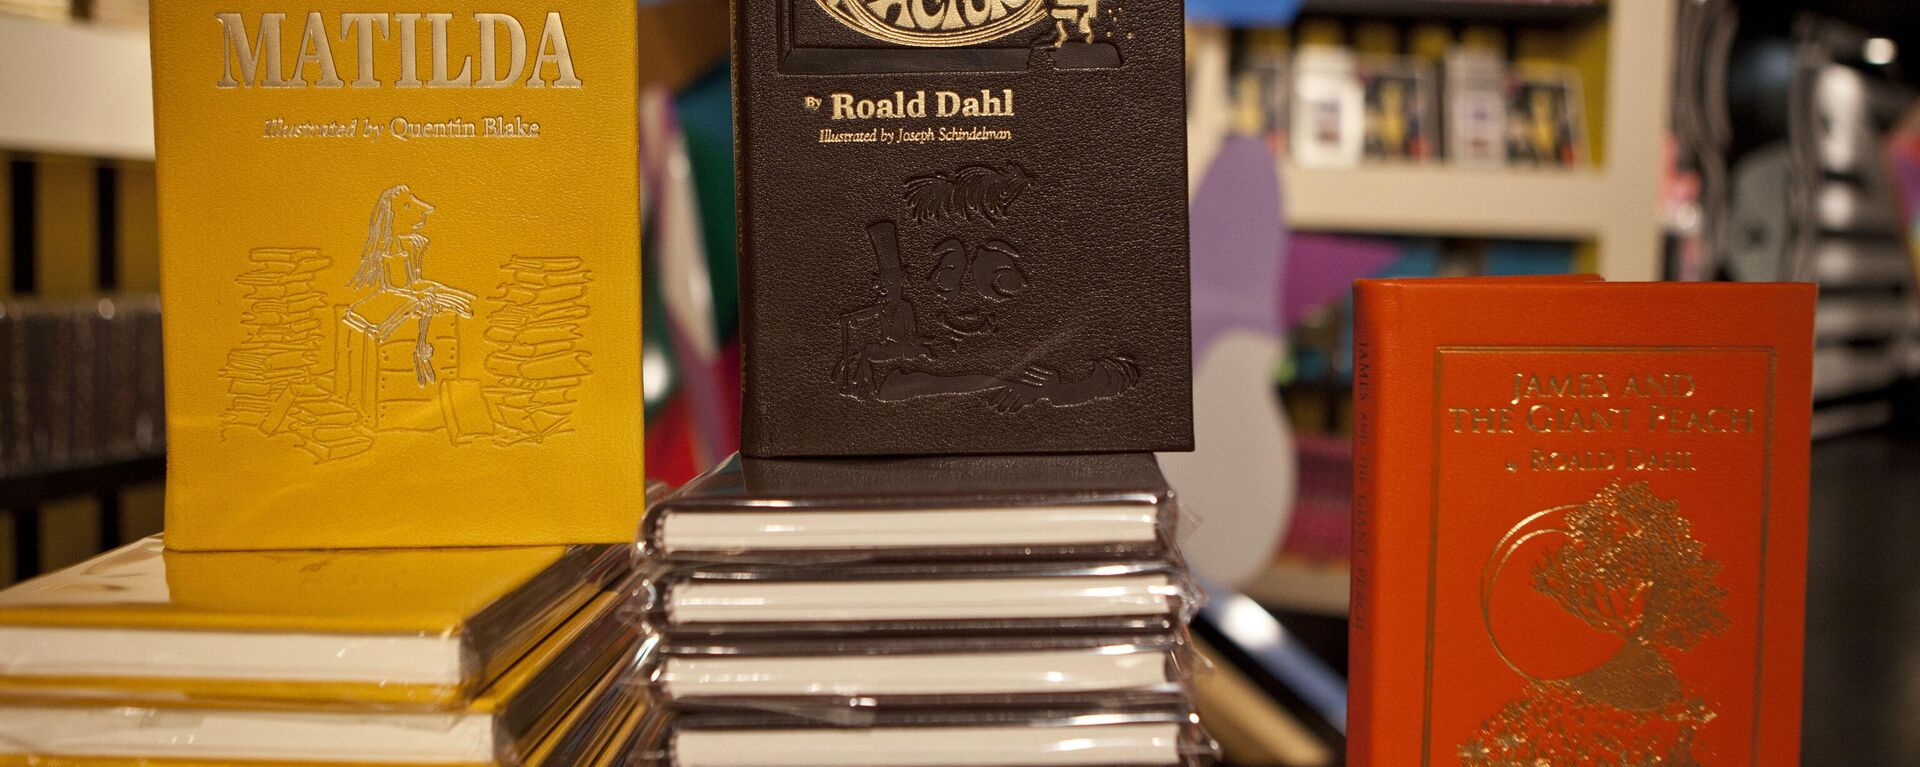 Books by Roald Dahl are displayed at the Barney's store on East 60th Street in New York on Monday, Nov. 21, 2011 - Sputnik International, 1920, 20.02.2023